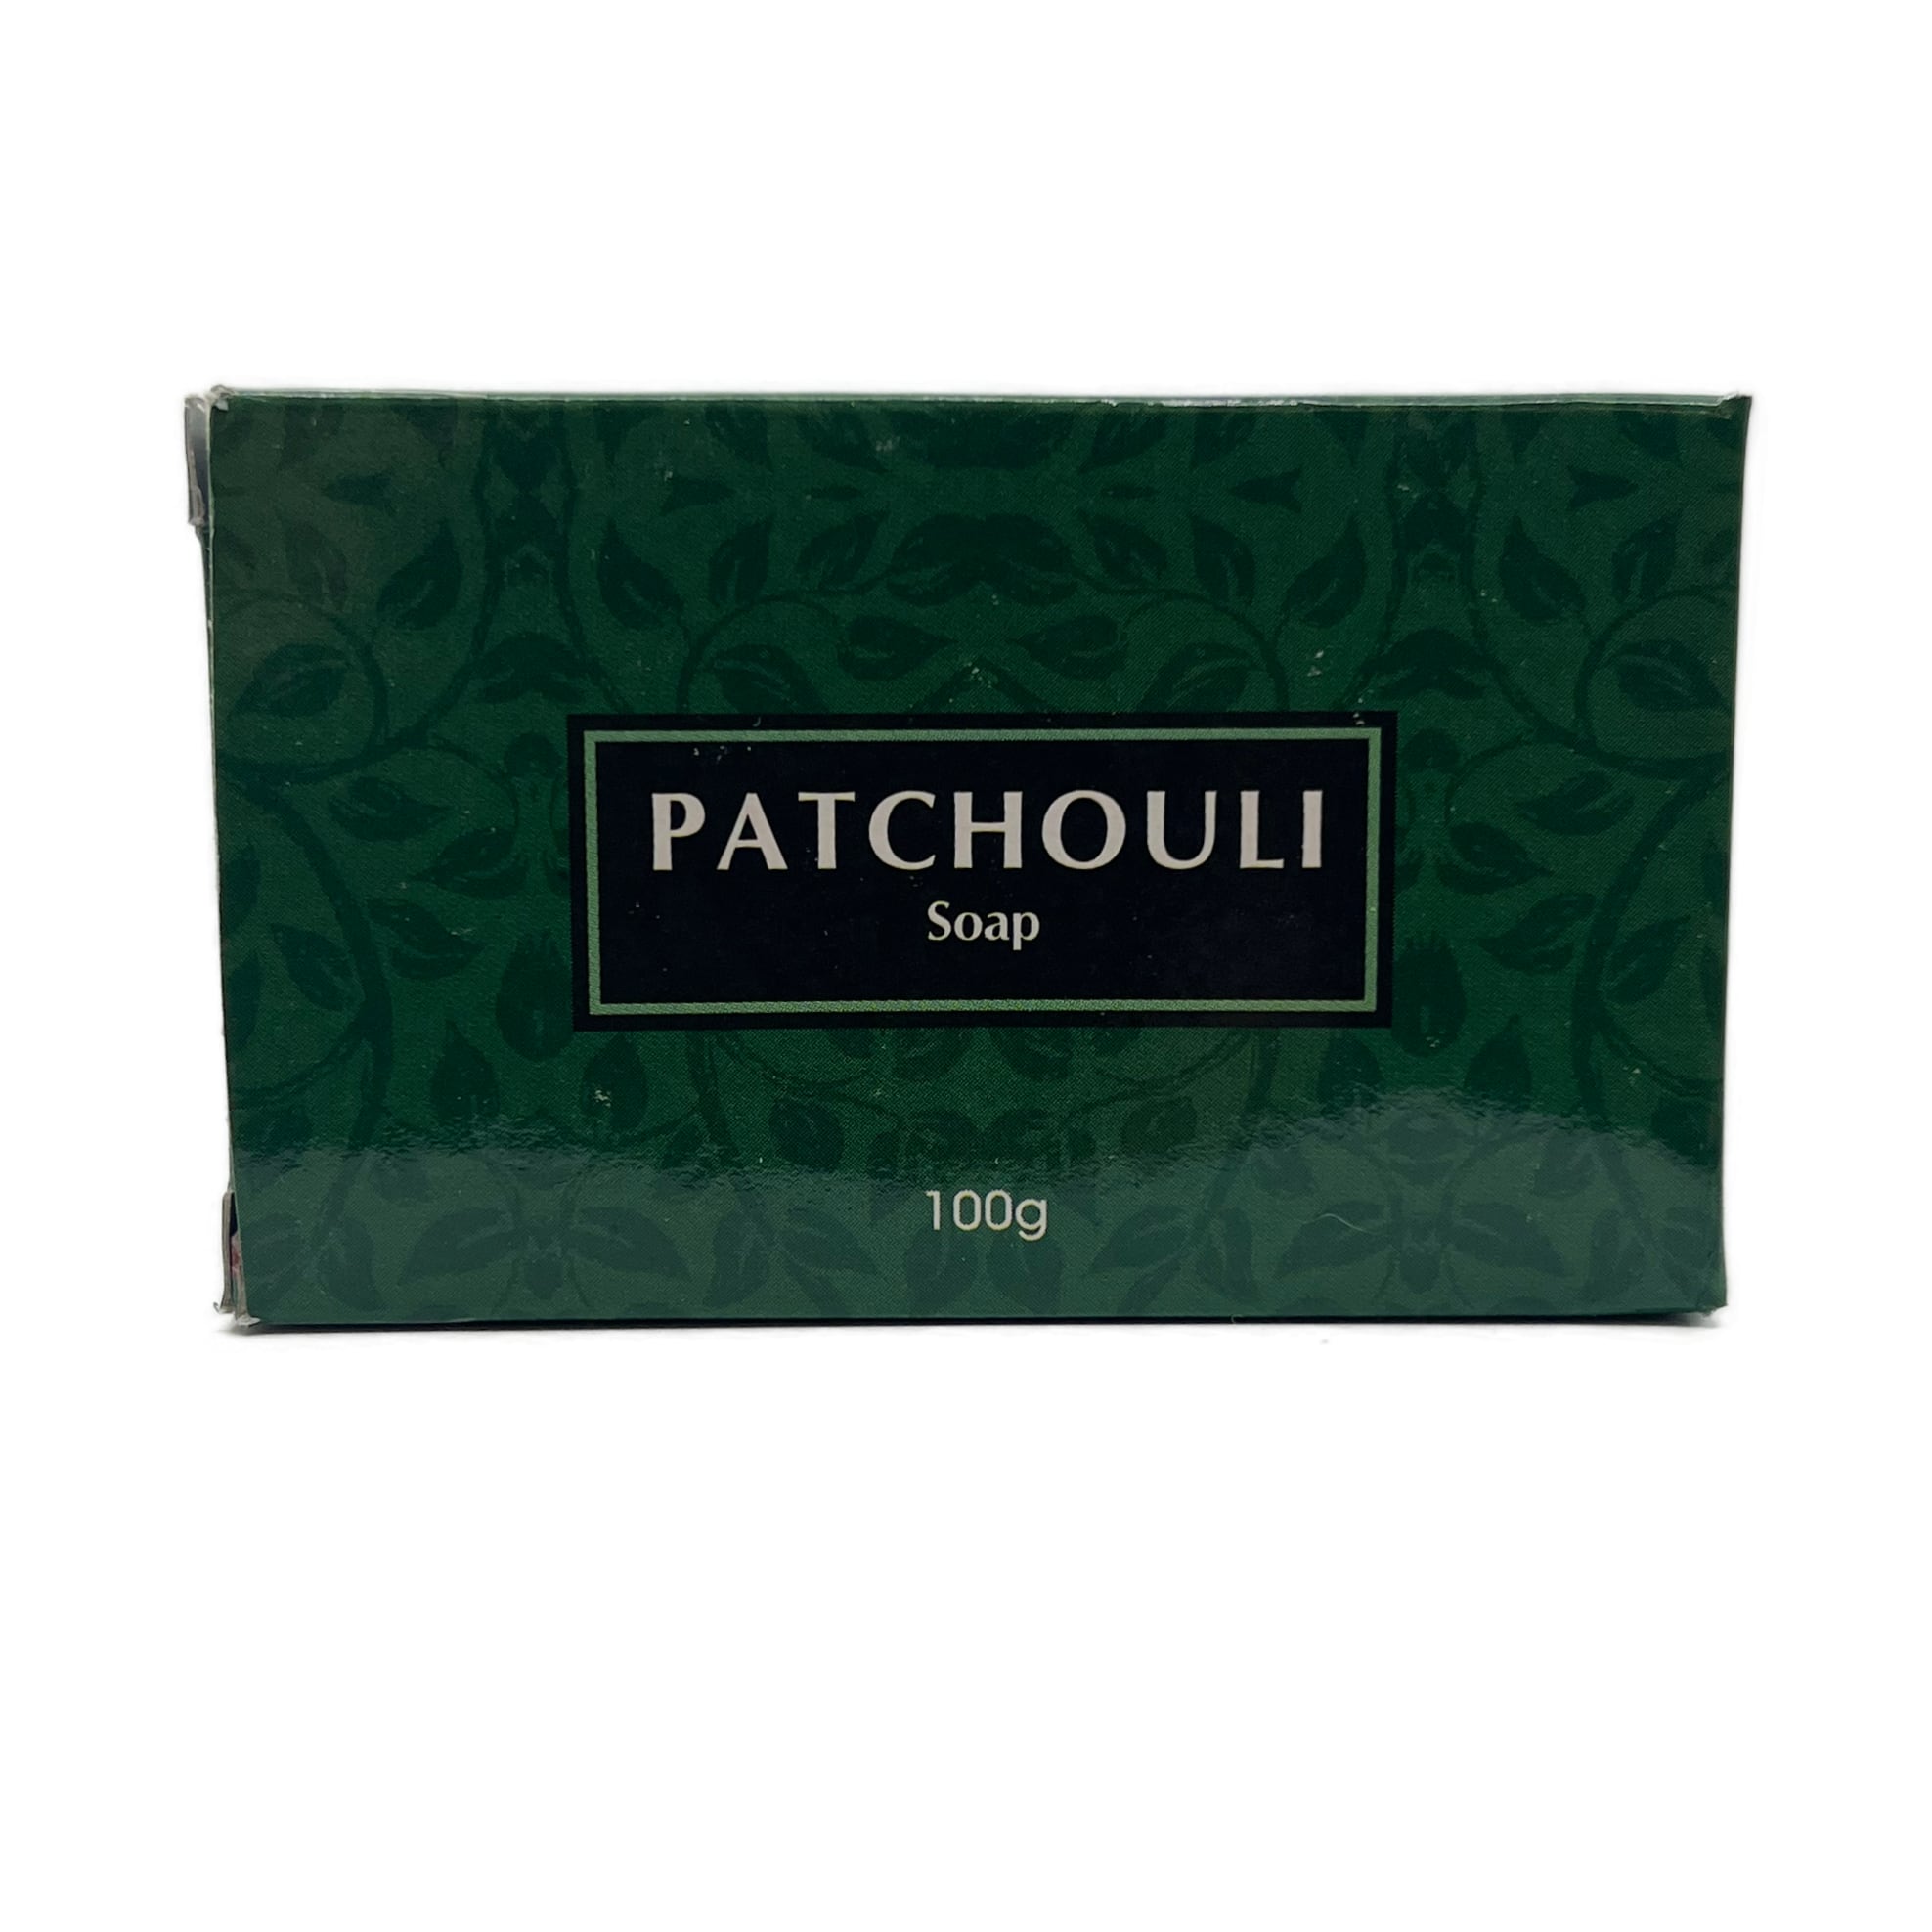 Dark green box with white writing Patchouli Soap